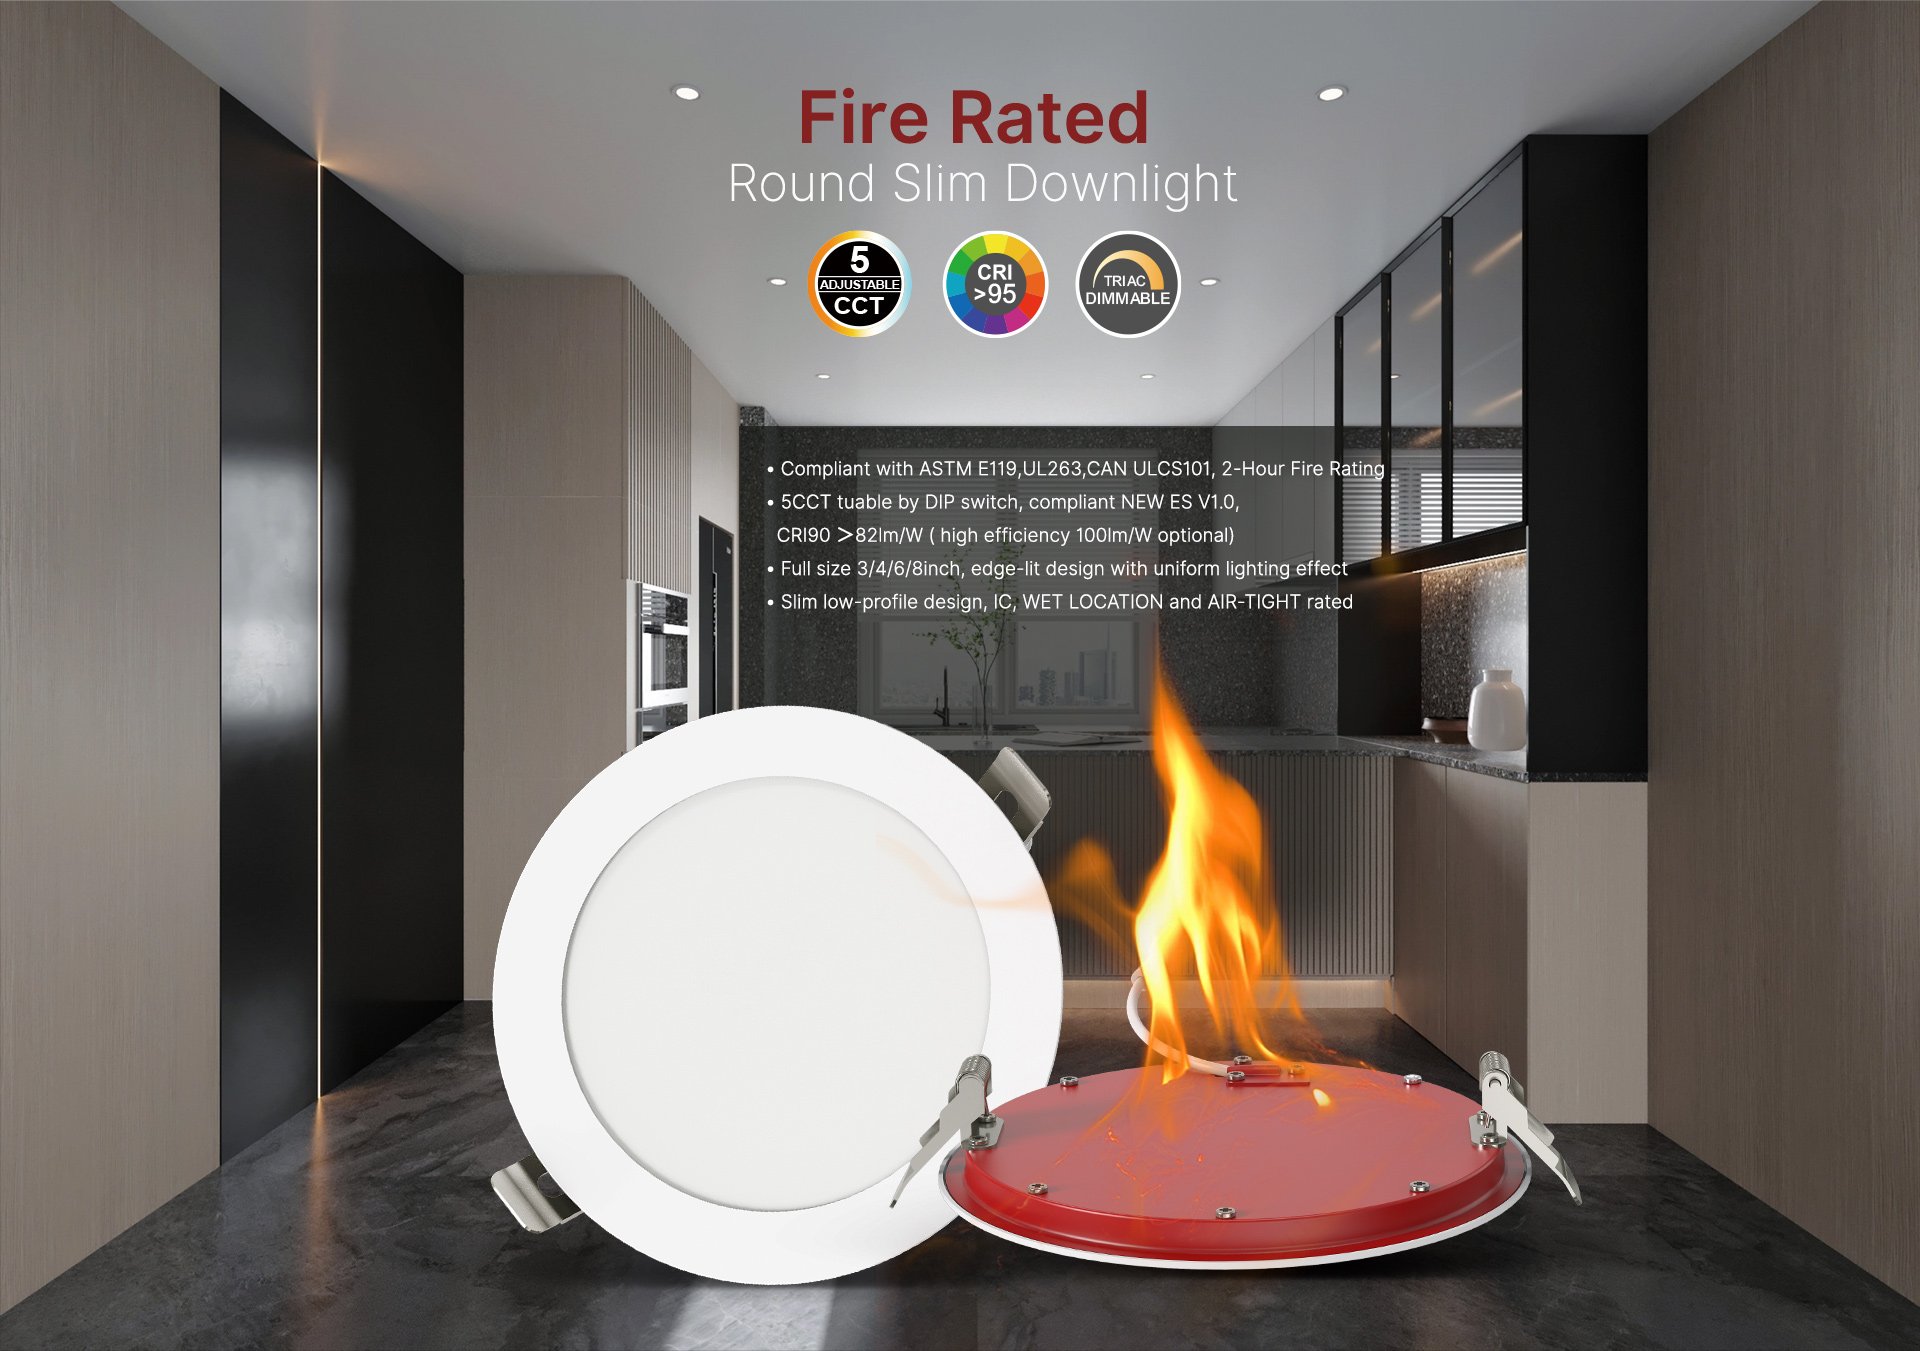 Fire Rated Round Slim Downlight